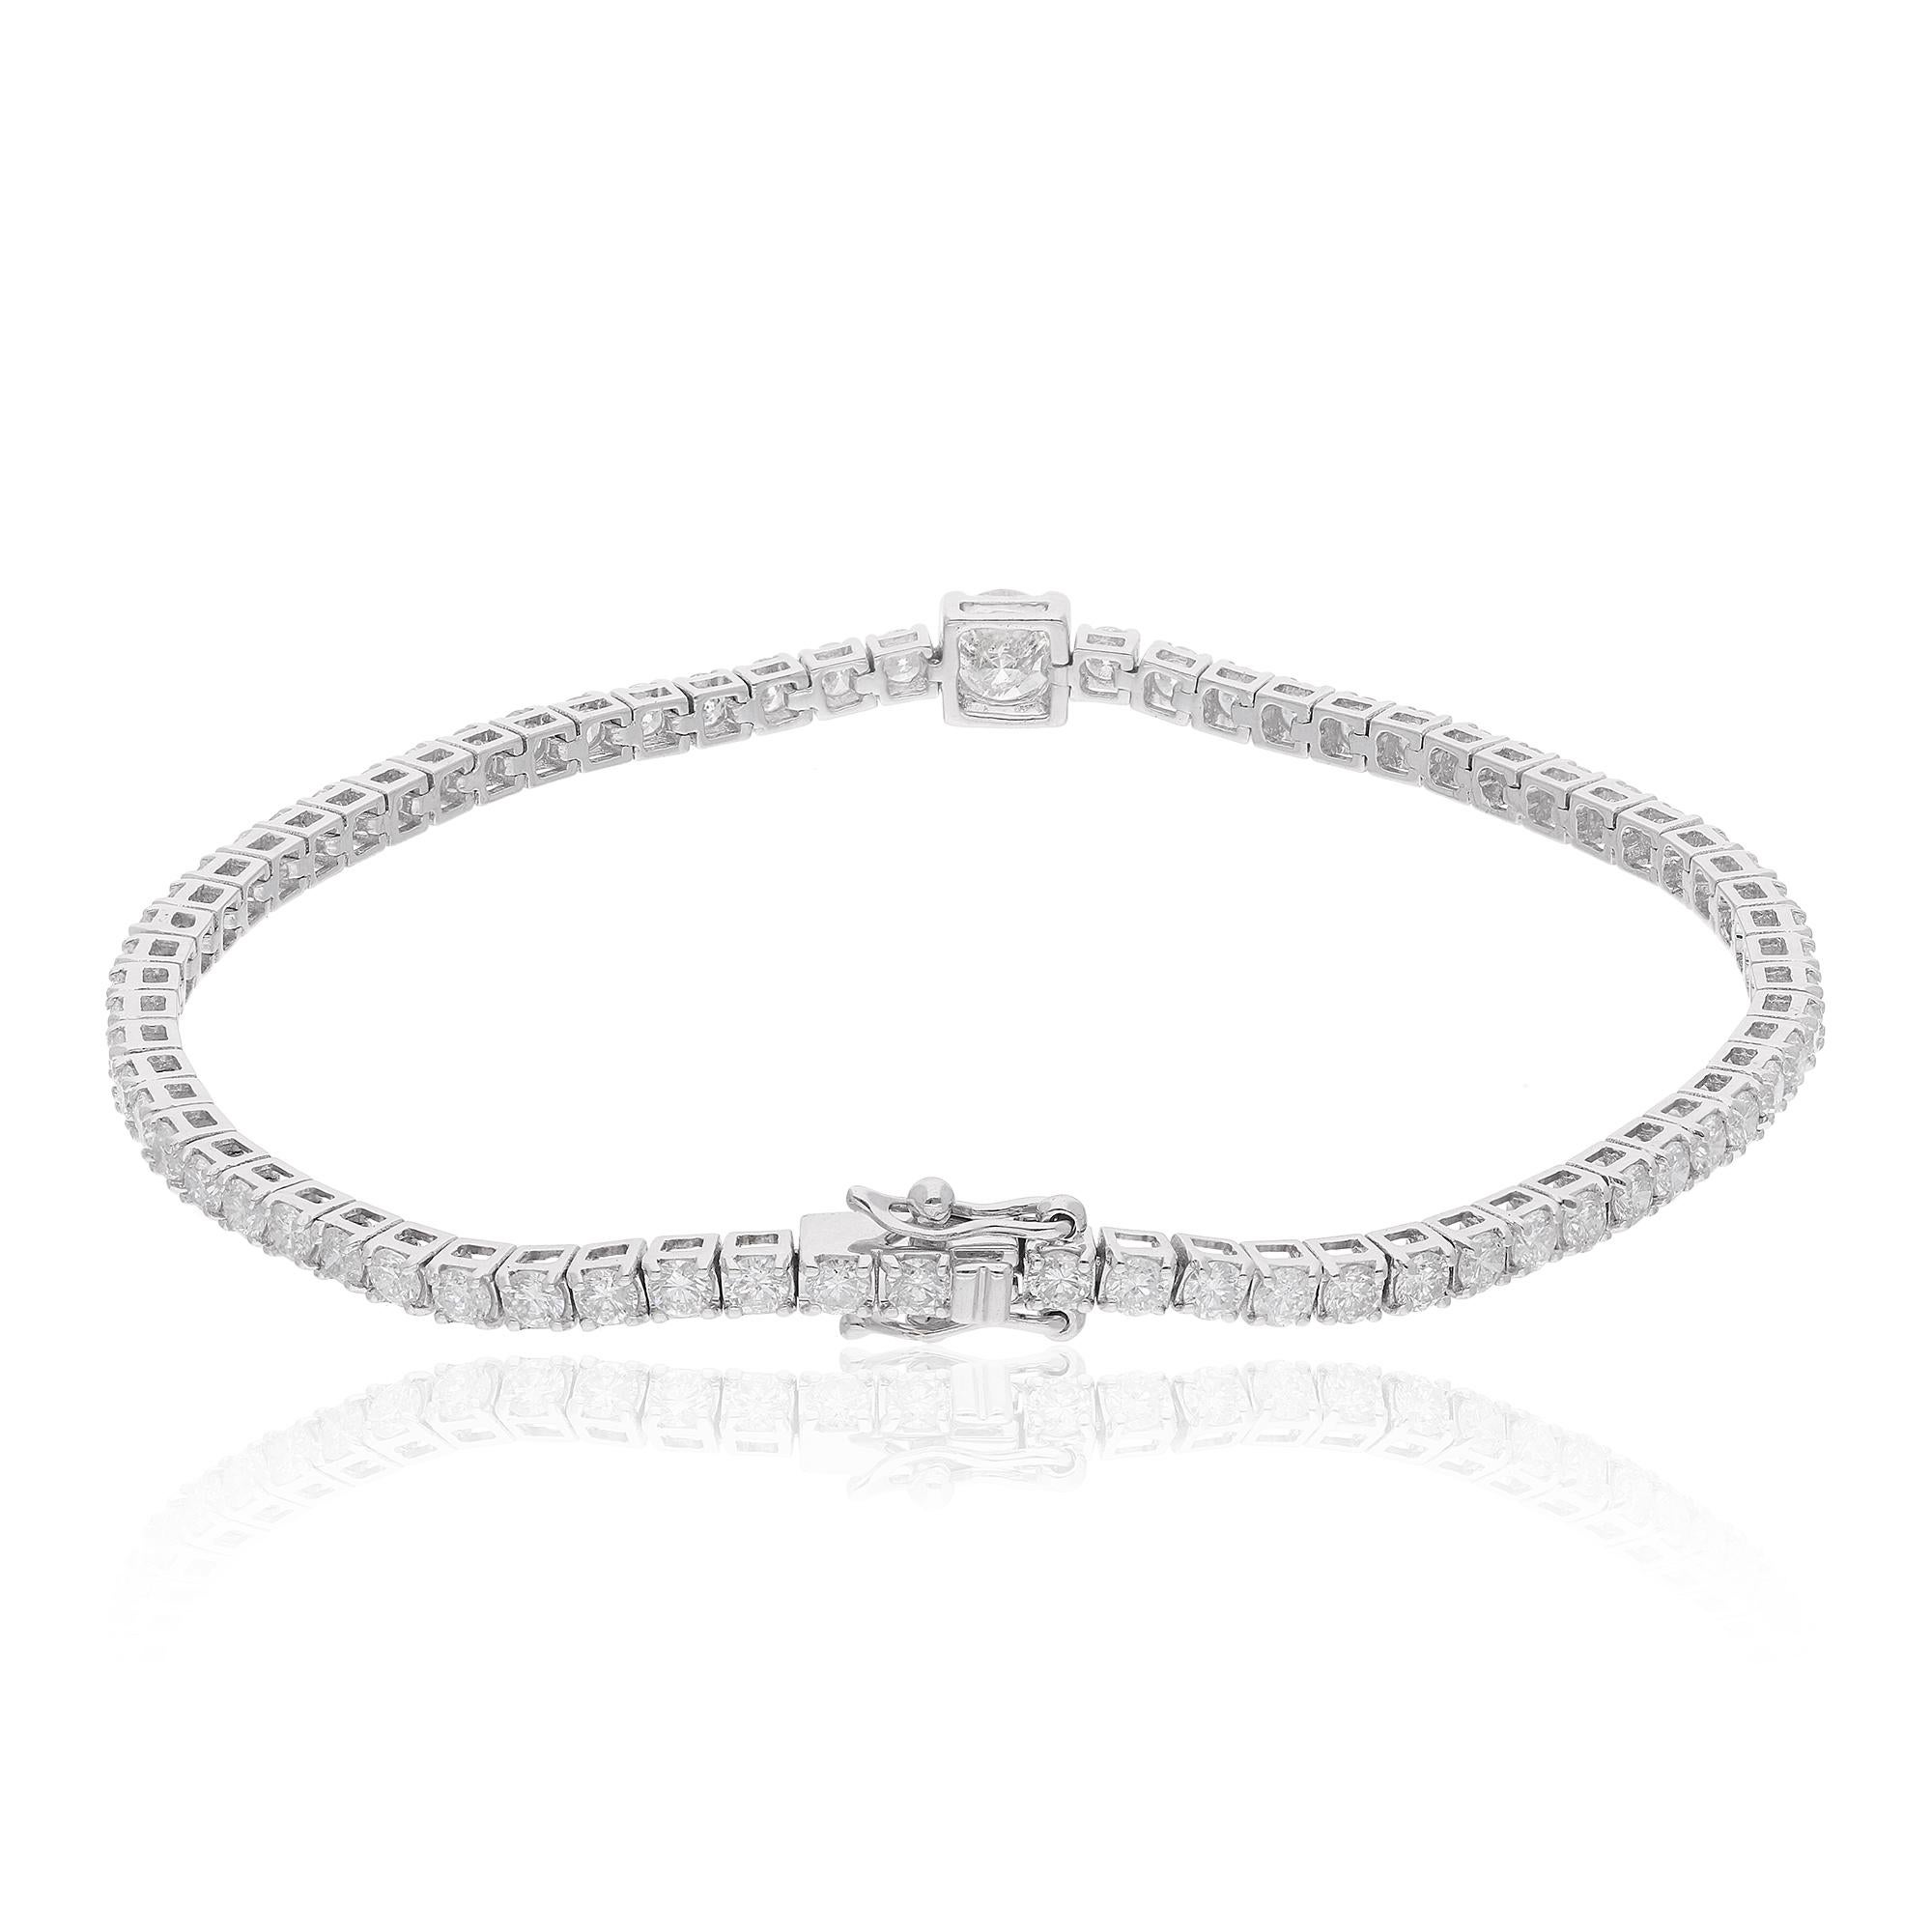 Item Code :- SEBR-43447
Gross Wt. :- 7.51 gm
18k White Gold Wt. :- 6.87 gm
Natural Diamond Wt. :- 3.22 Ct.  ( AVERAGE DIAMOND CLARITY SI1-SI2 & COLOR H-I )
Bracelet Length :- 7 Inches Long

✦ Sizing
.....................
We can adjust most items to